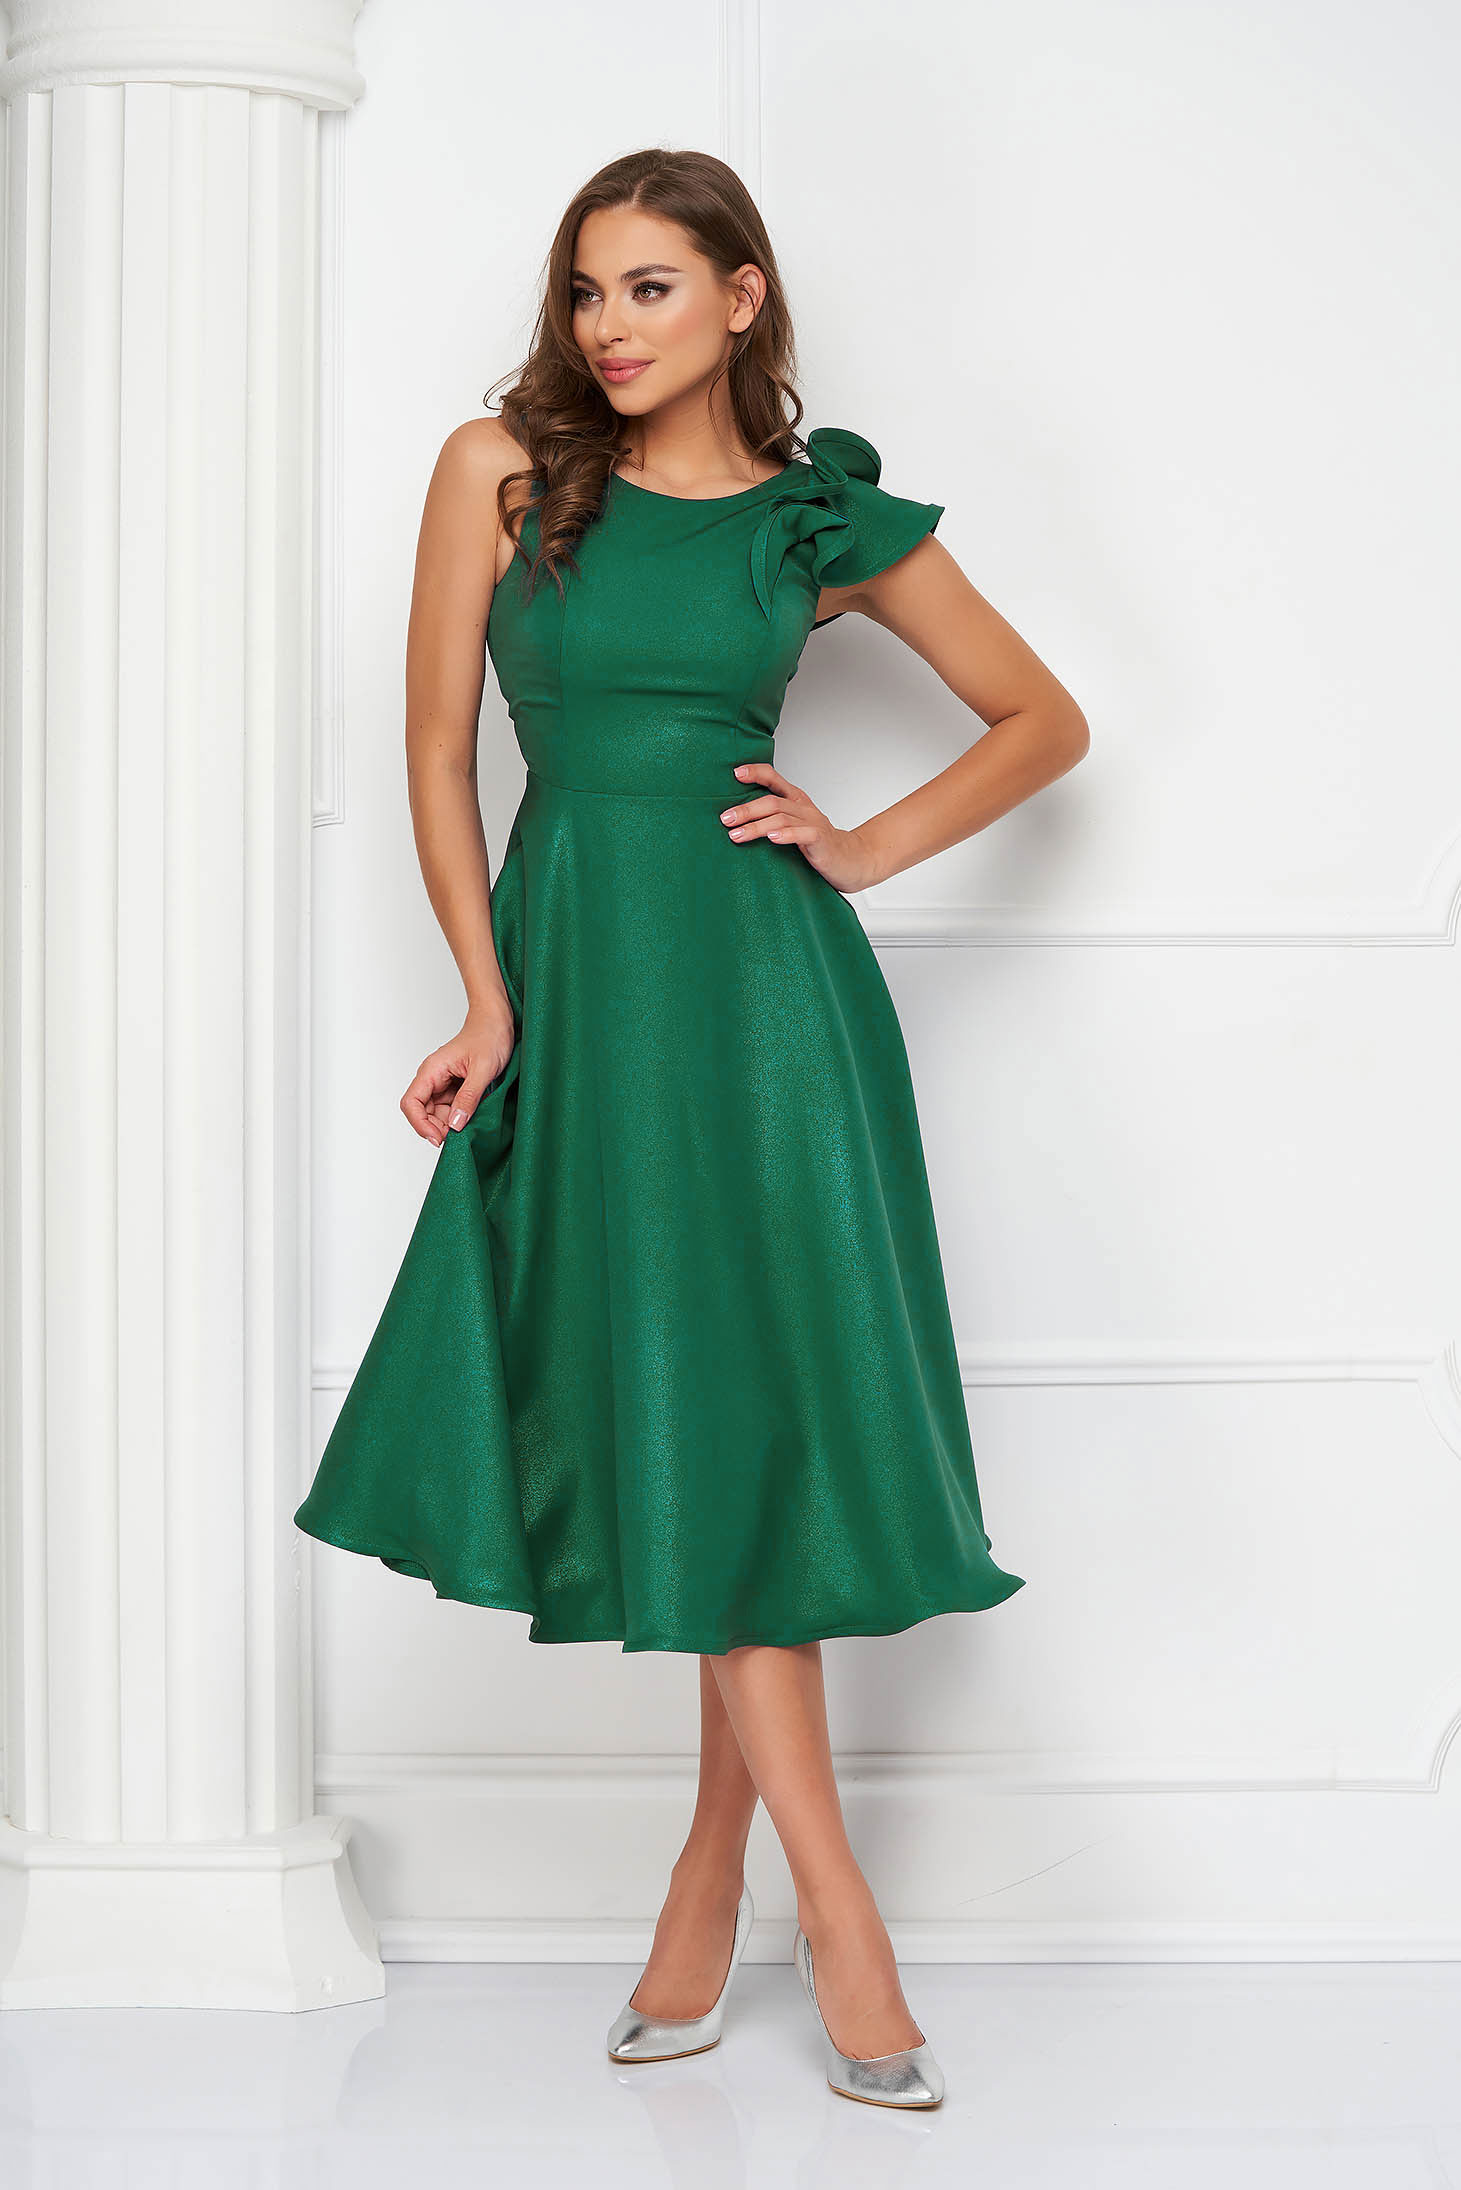 Green Elastic Fabric Dress with Ruffles on the Shoulder - StarShinerS 1 - StarShinerS.com